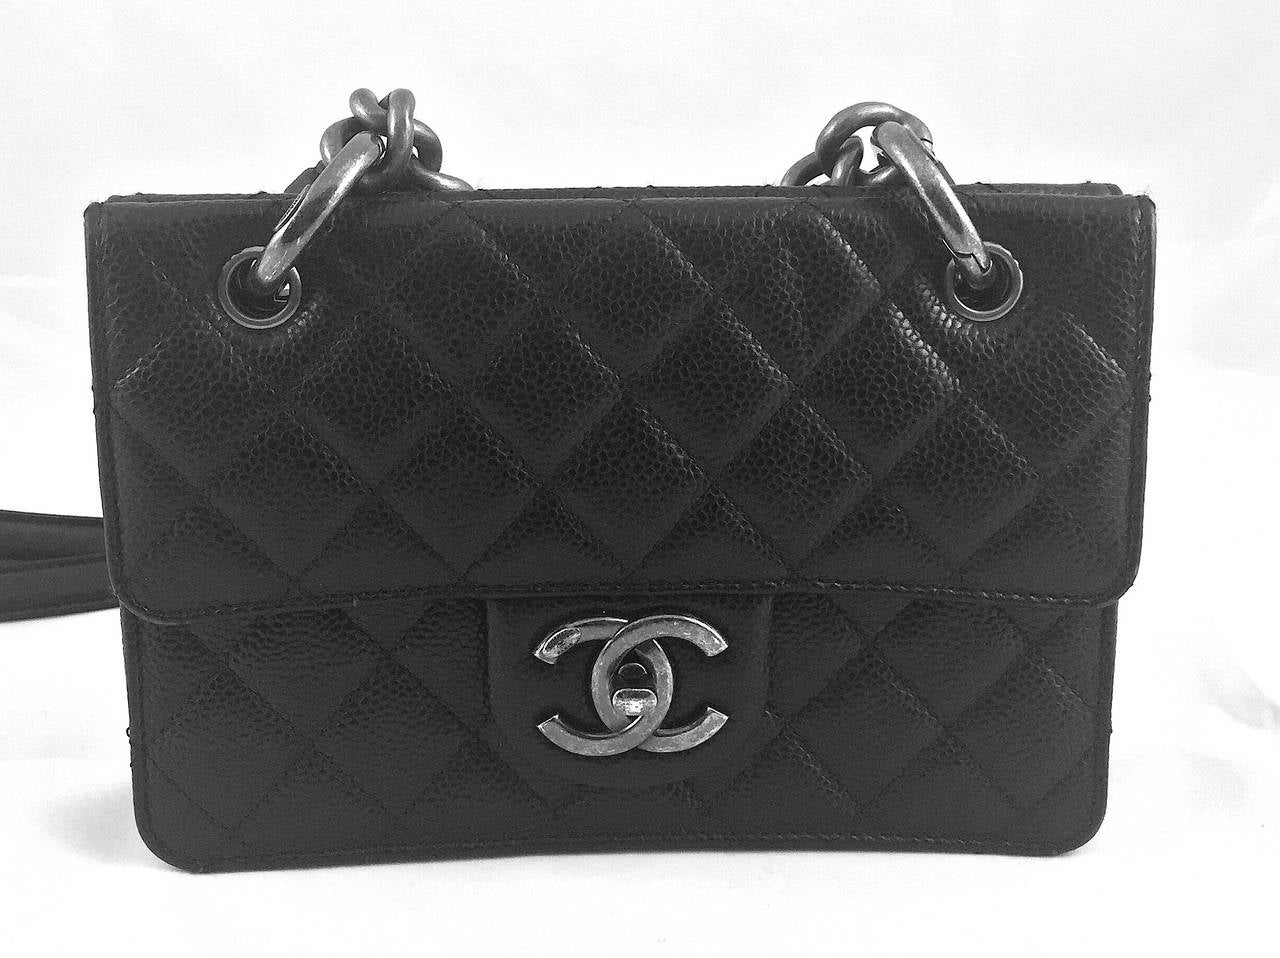 Limited edition Chanel black caviar retro flap shoulder bag with aged silver-tone hardware, curb chain strap, removable leather shoulder strap, front flap CC turn lock closure, and separate back zippered pouch. Red fabric interior. Includes dust